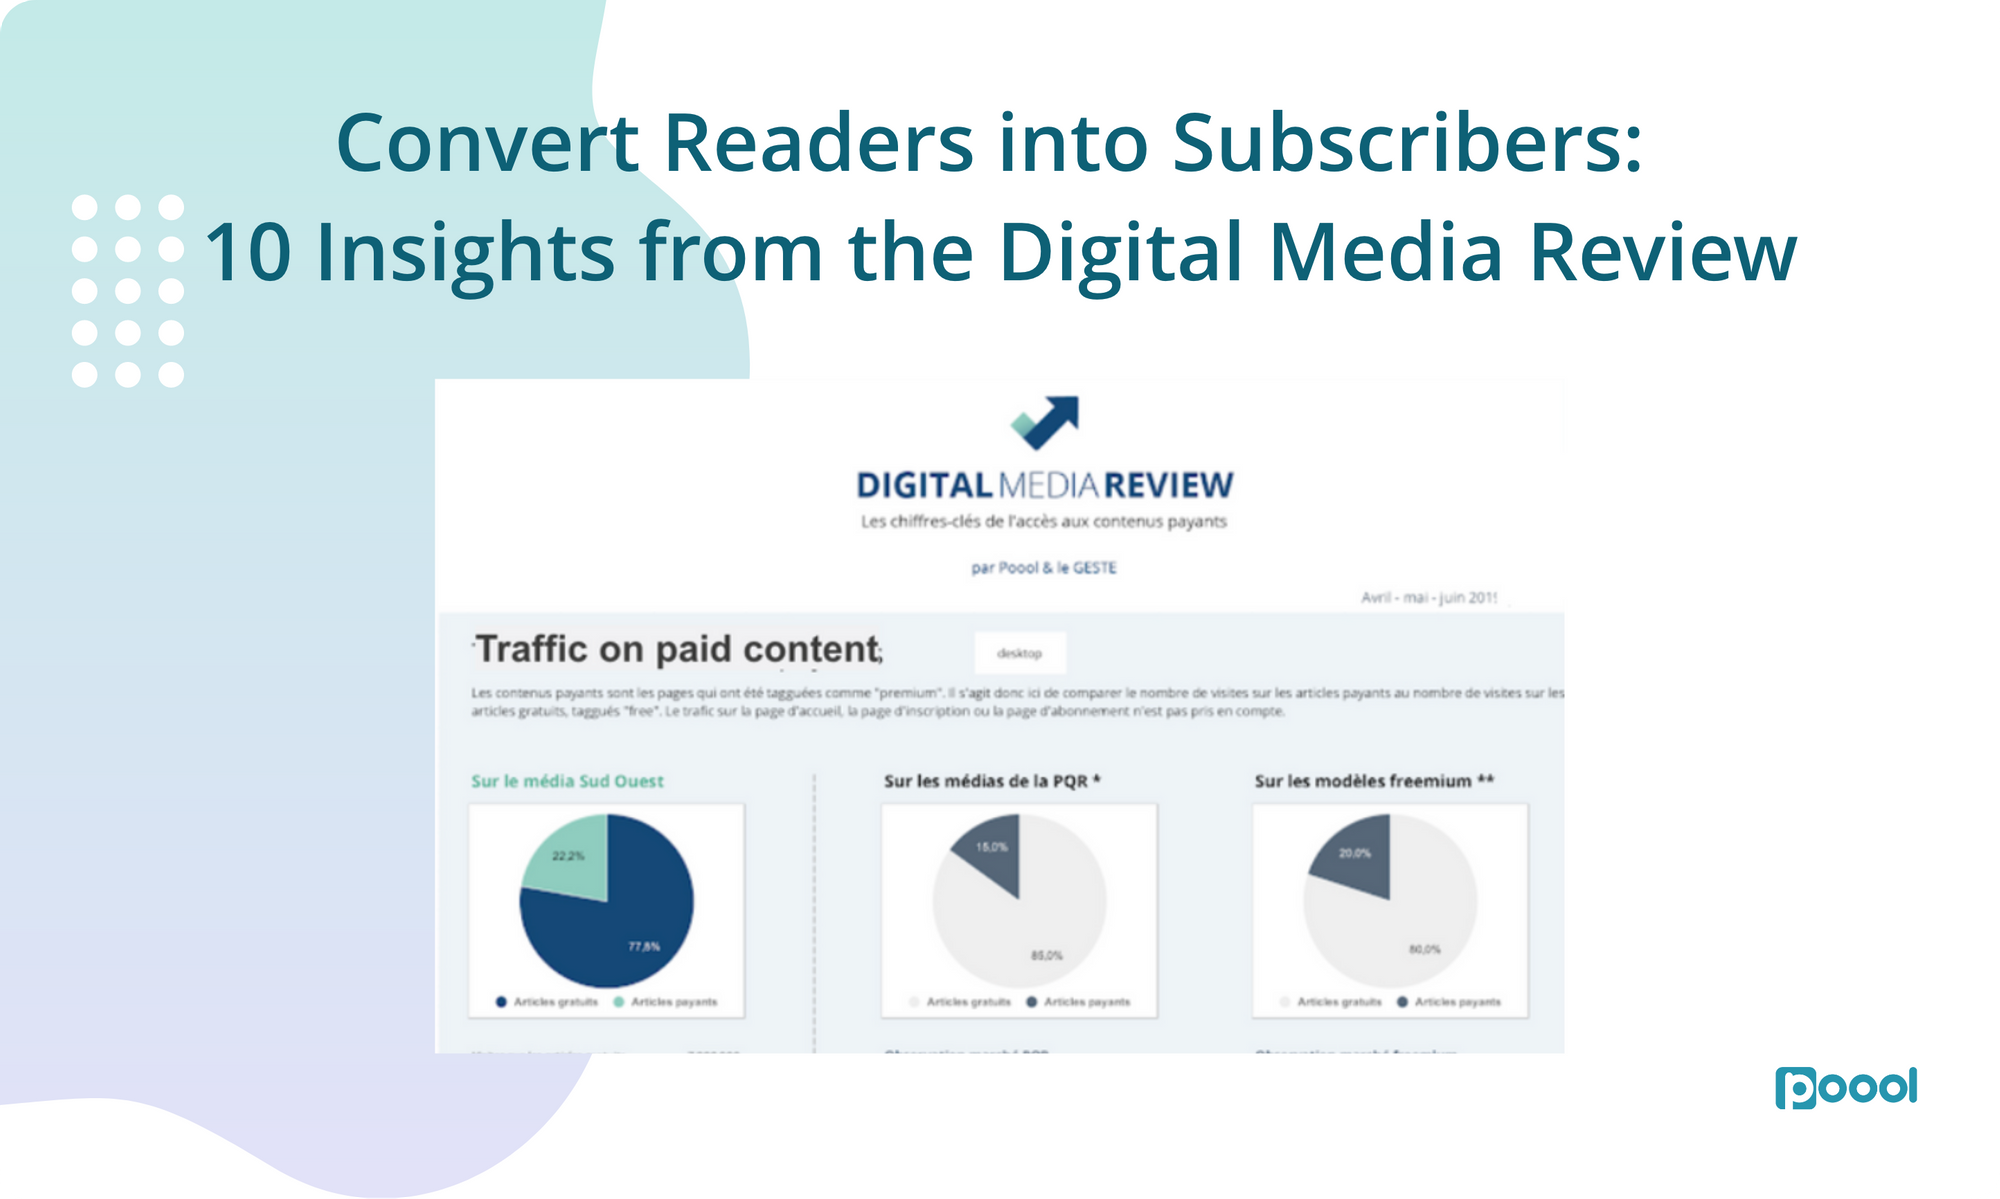 Convert Readers into Subscribers: 10 Insights from the Digital Media Review.